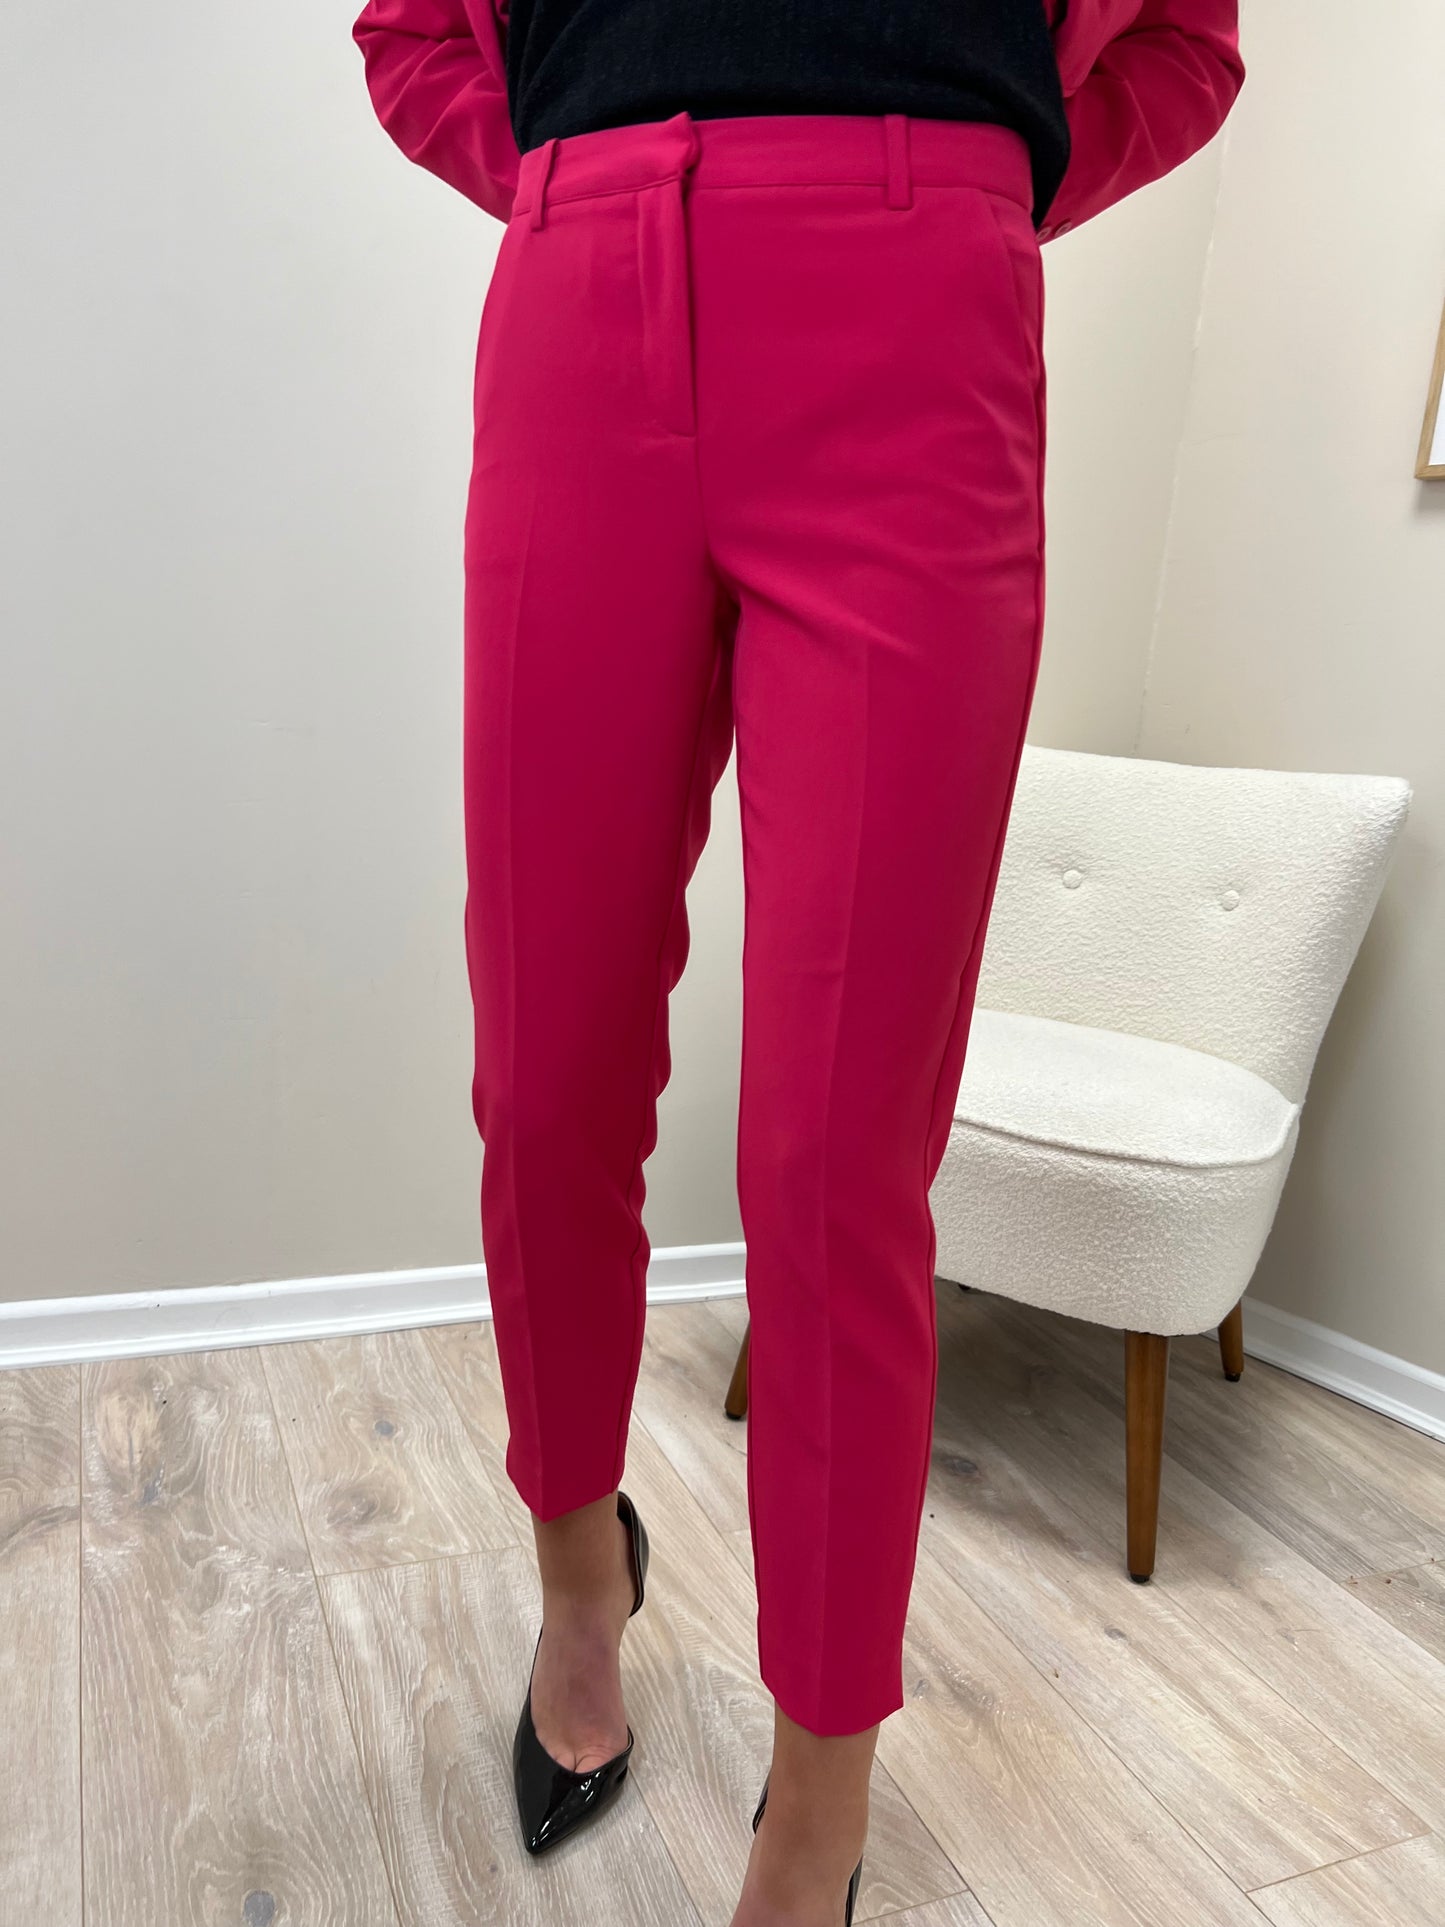 Ichi Ihlexi Trousers in Love Potion